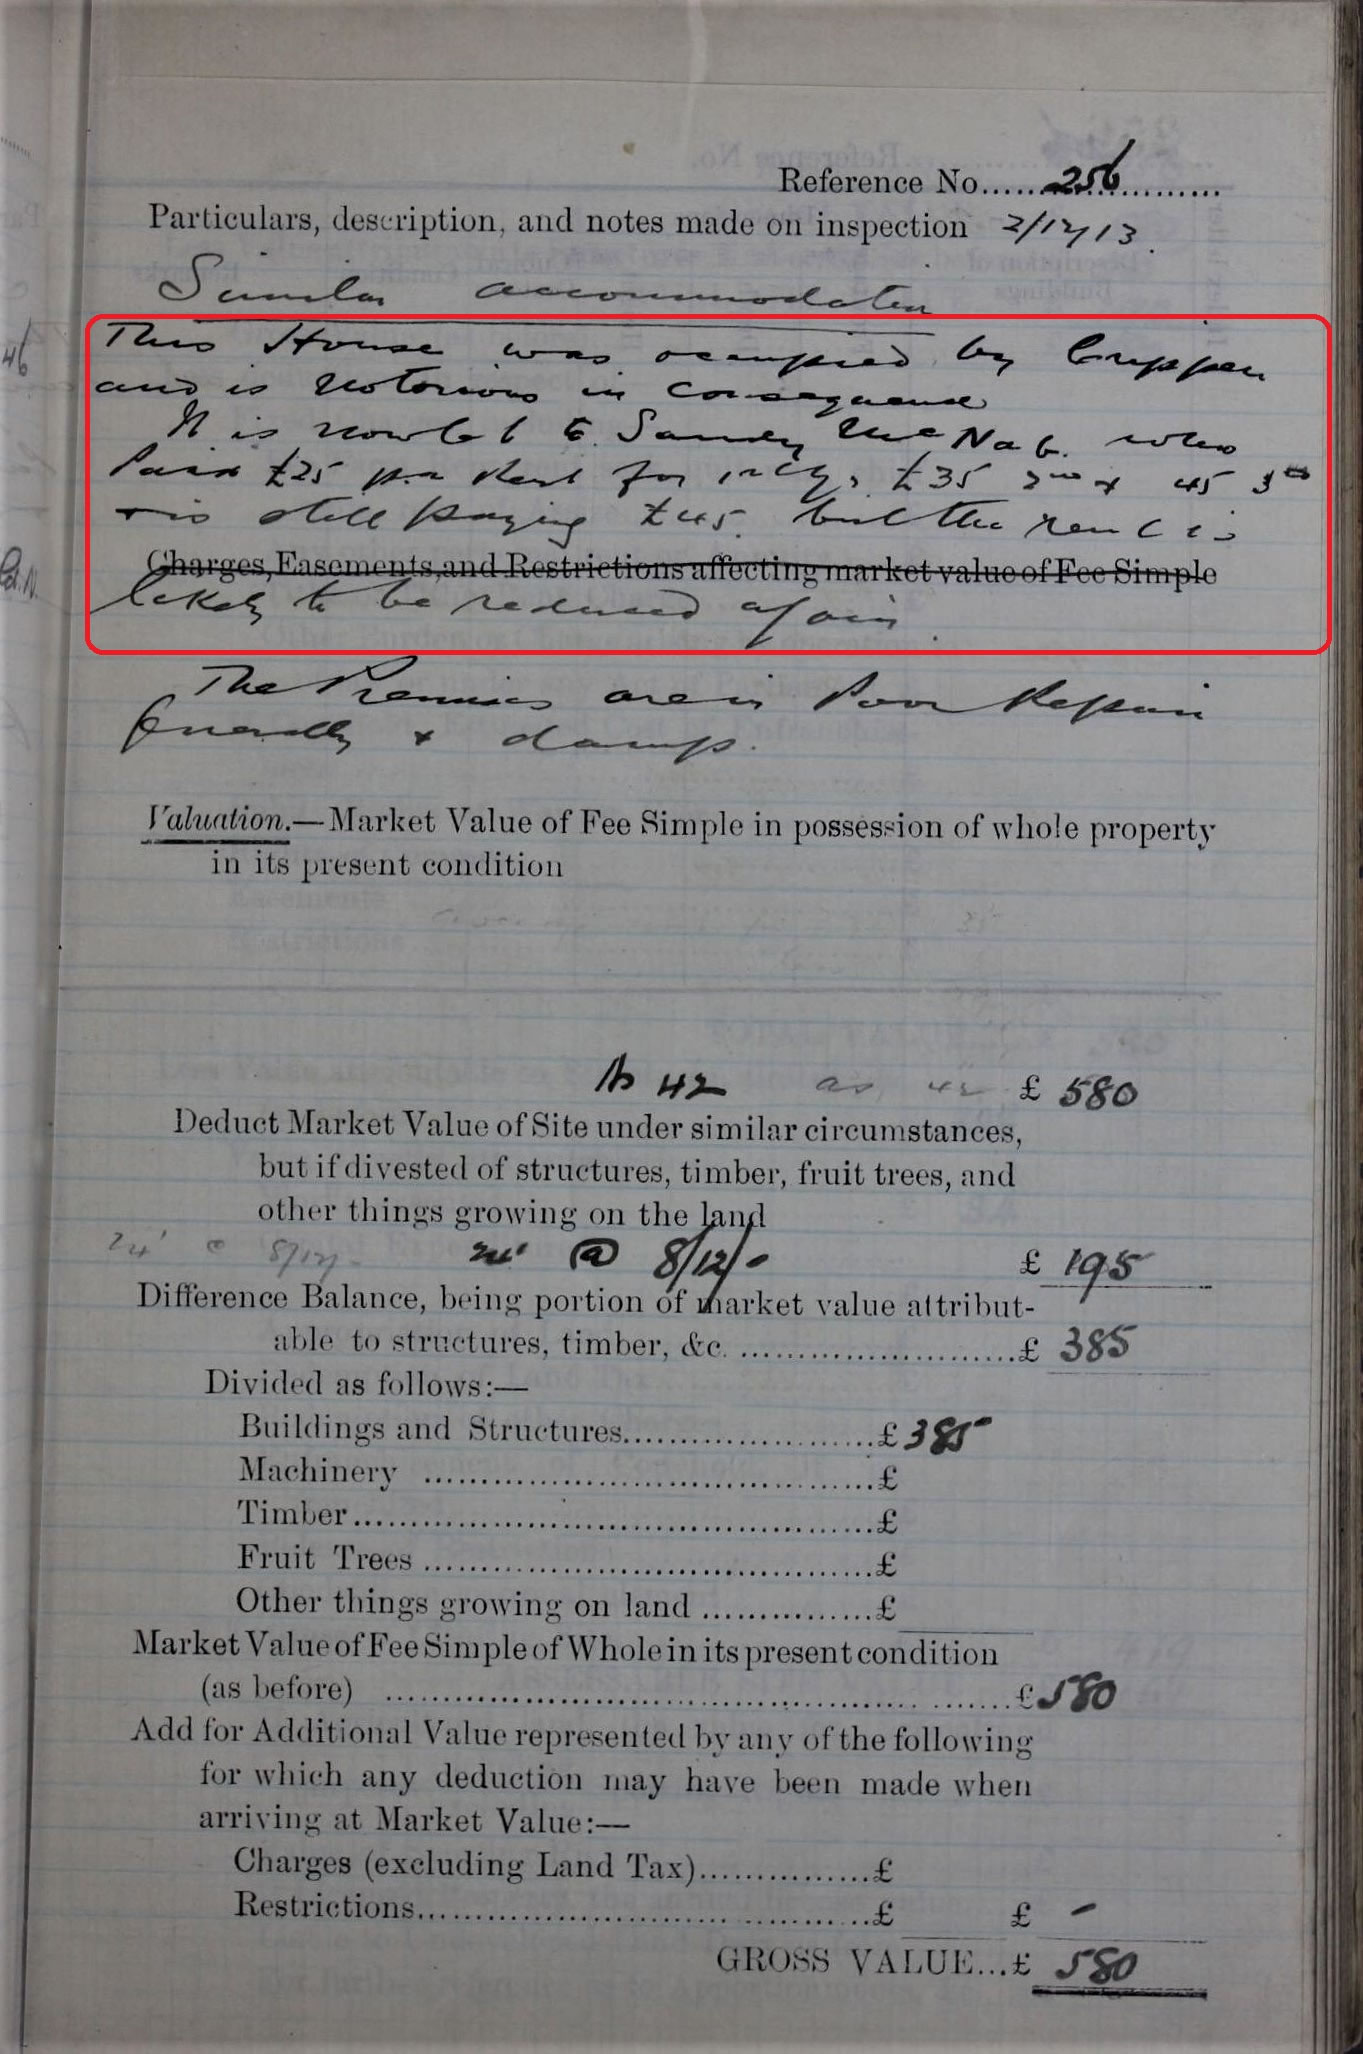 The IR 58 field book notes: "This house was occupied by Crippen and is notorious in consequence."